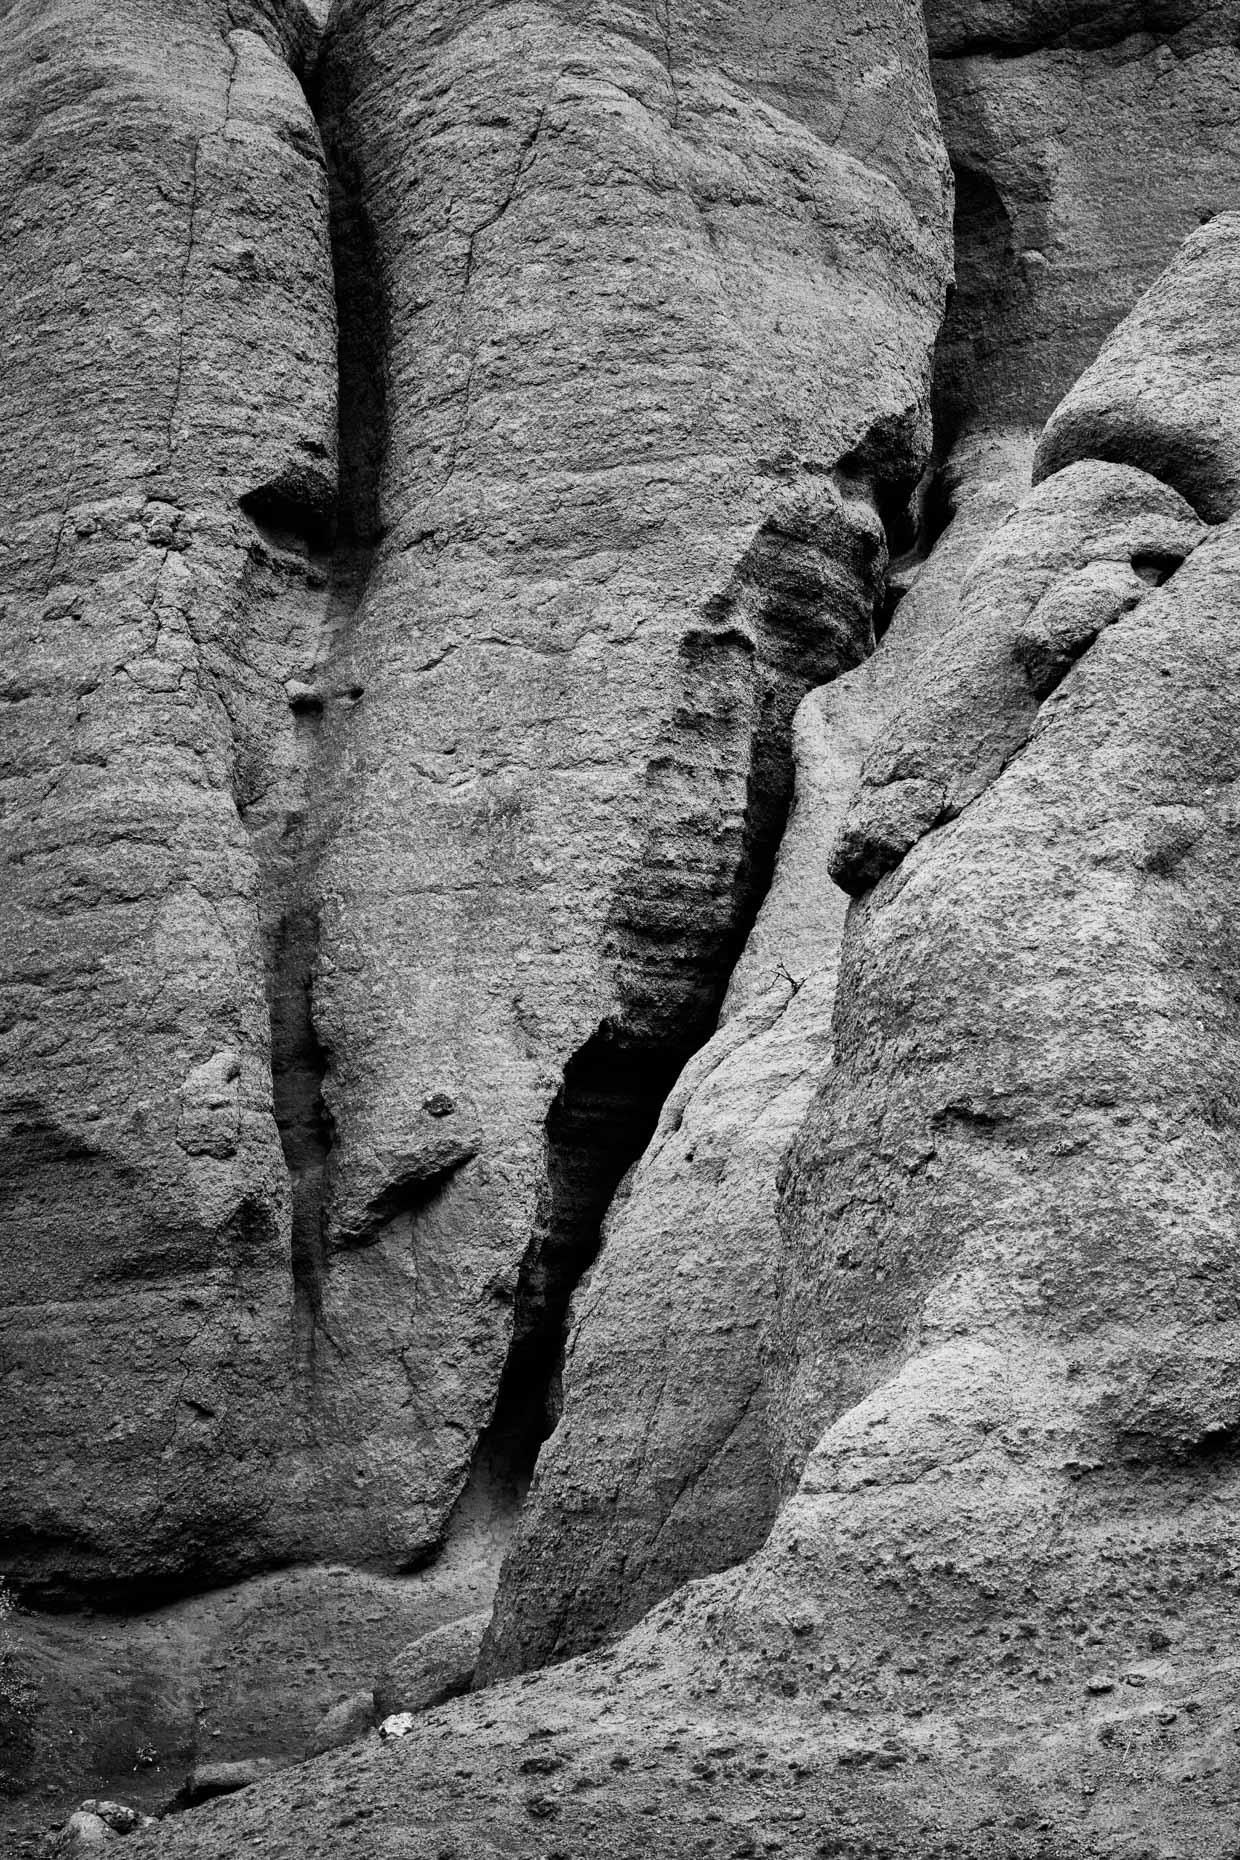 Red Mountain rock formation-b&w narrow crevasses in the rock wall